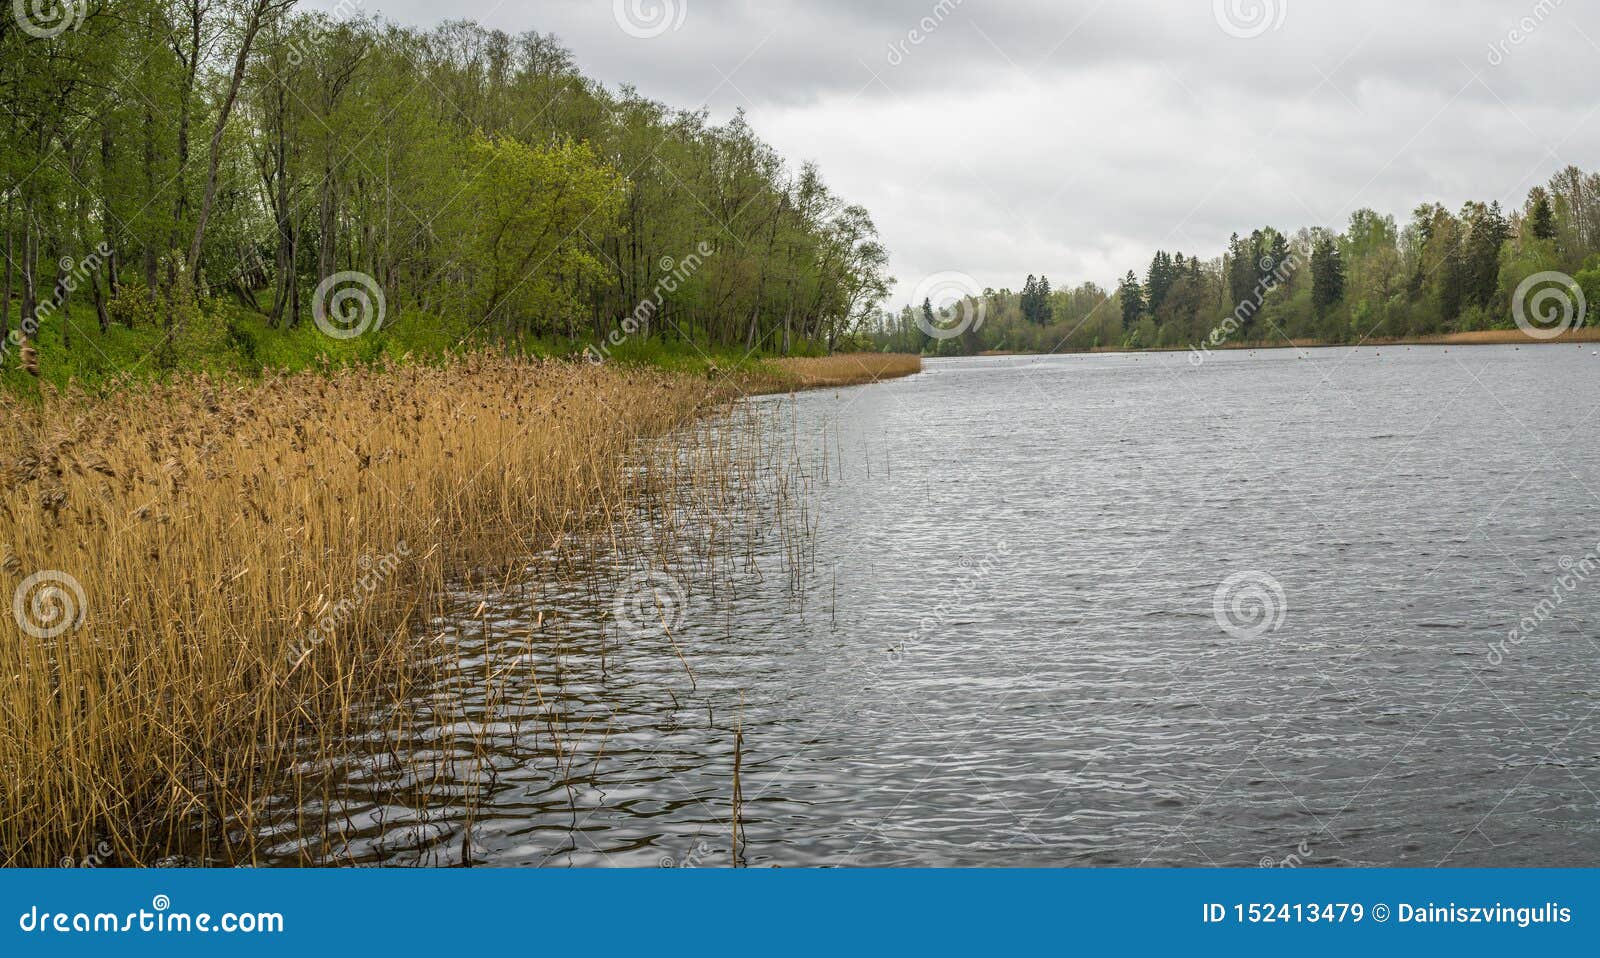 River bank with reeds stock image. Image of reeds, grass - 152413479